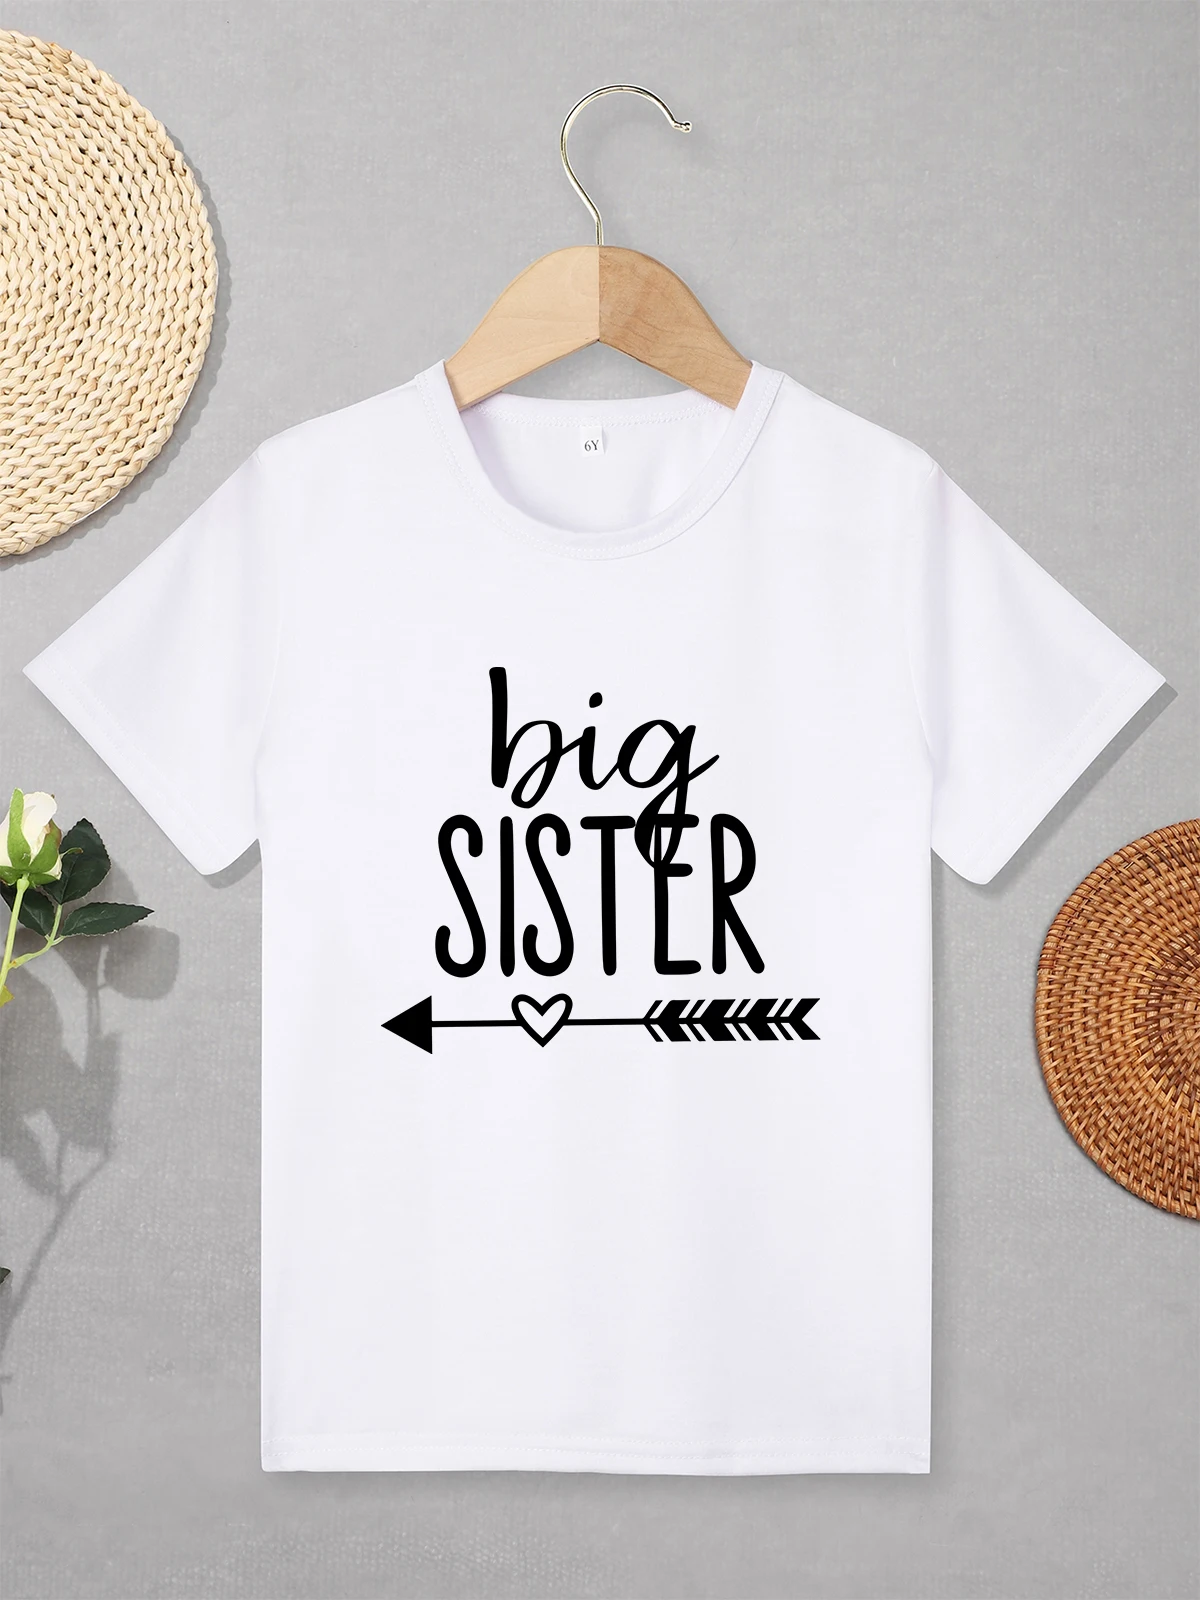 

Big Sister and Little Brother Twin Boy Girl T-shirt Simple Style Spring Summer Casual Cute Kids Clothes Fashion Trend Urban Tees